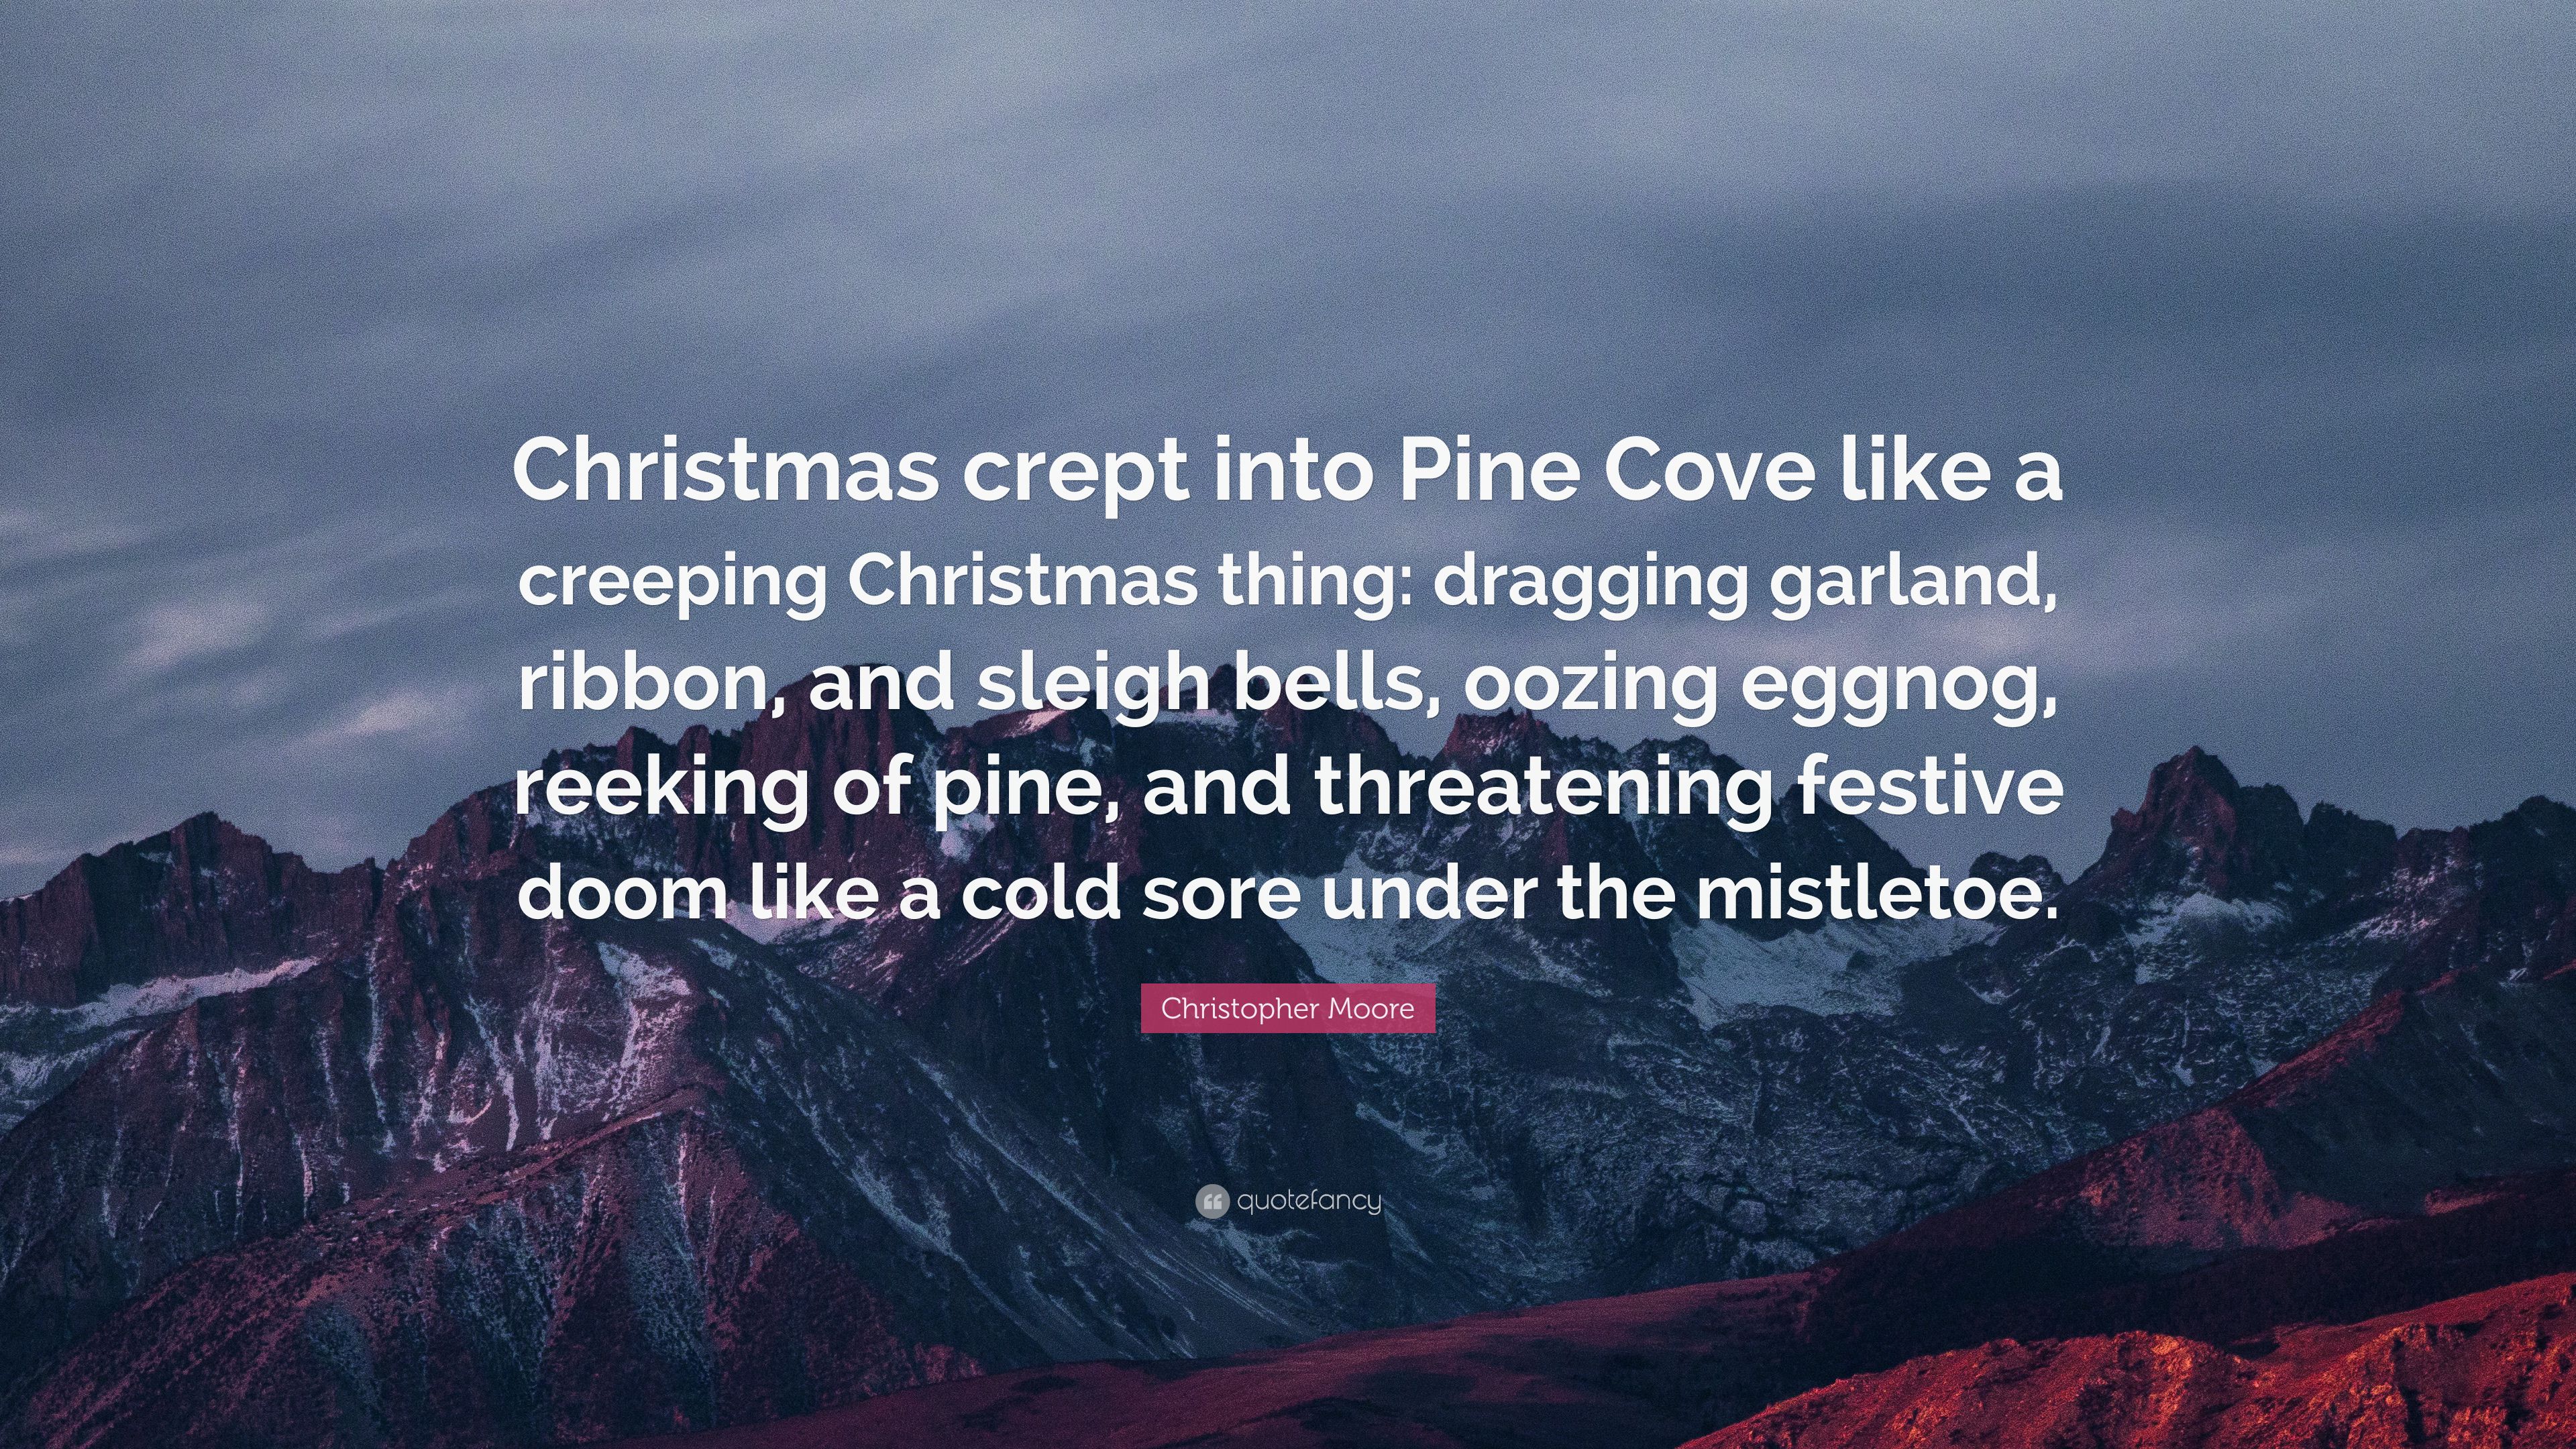 Christopher Moore Quote: “Christmas crept into Pine Cove like a